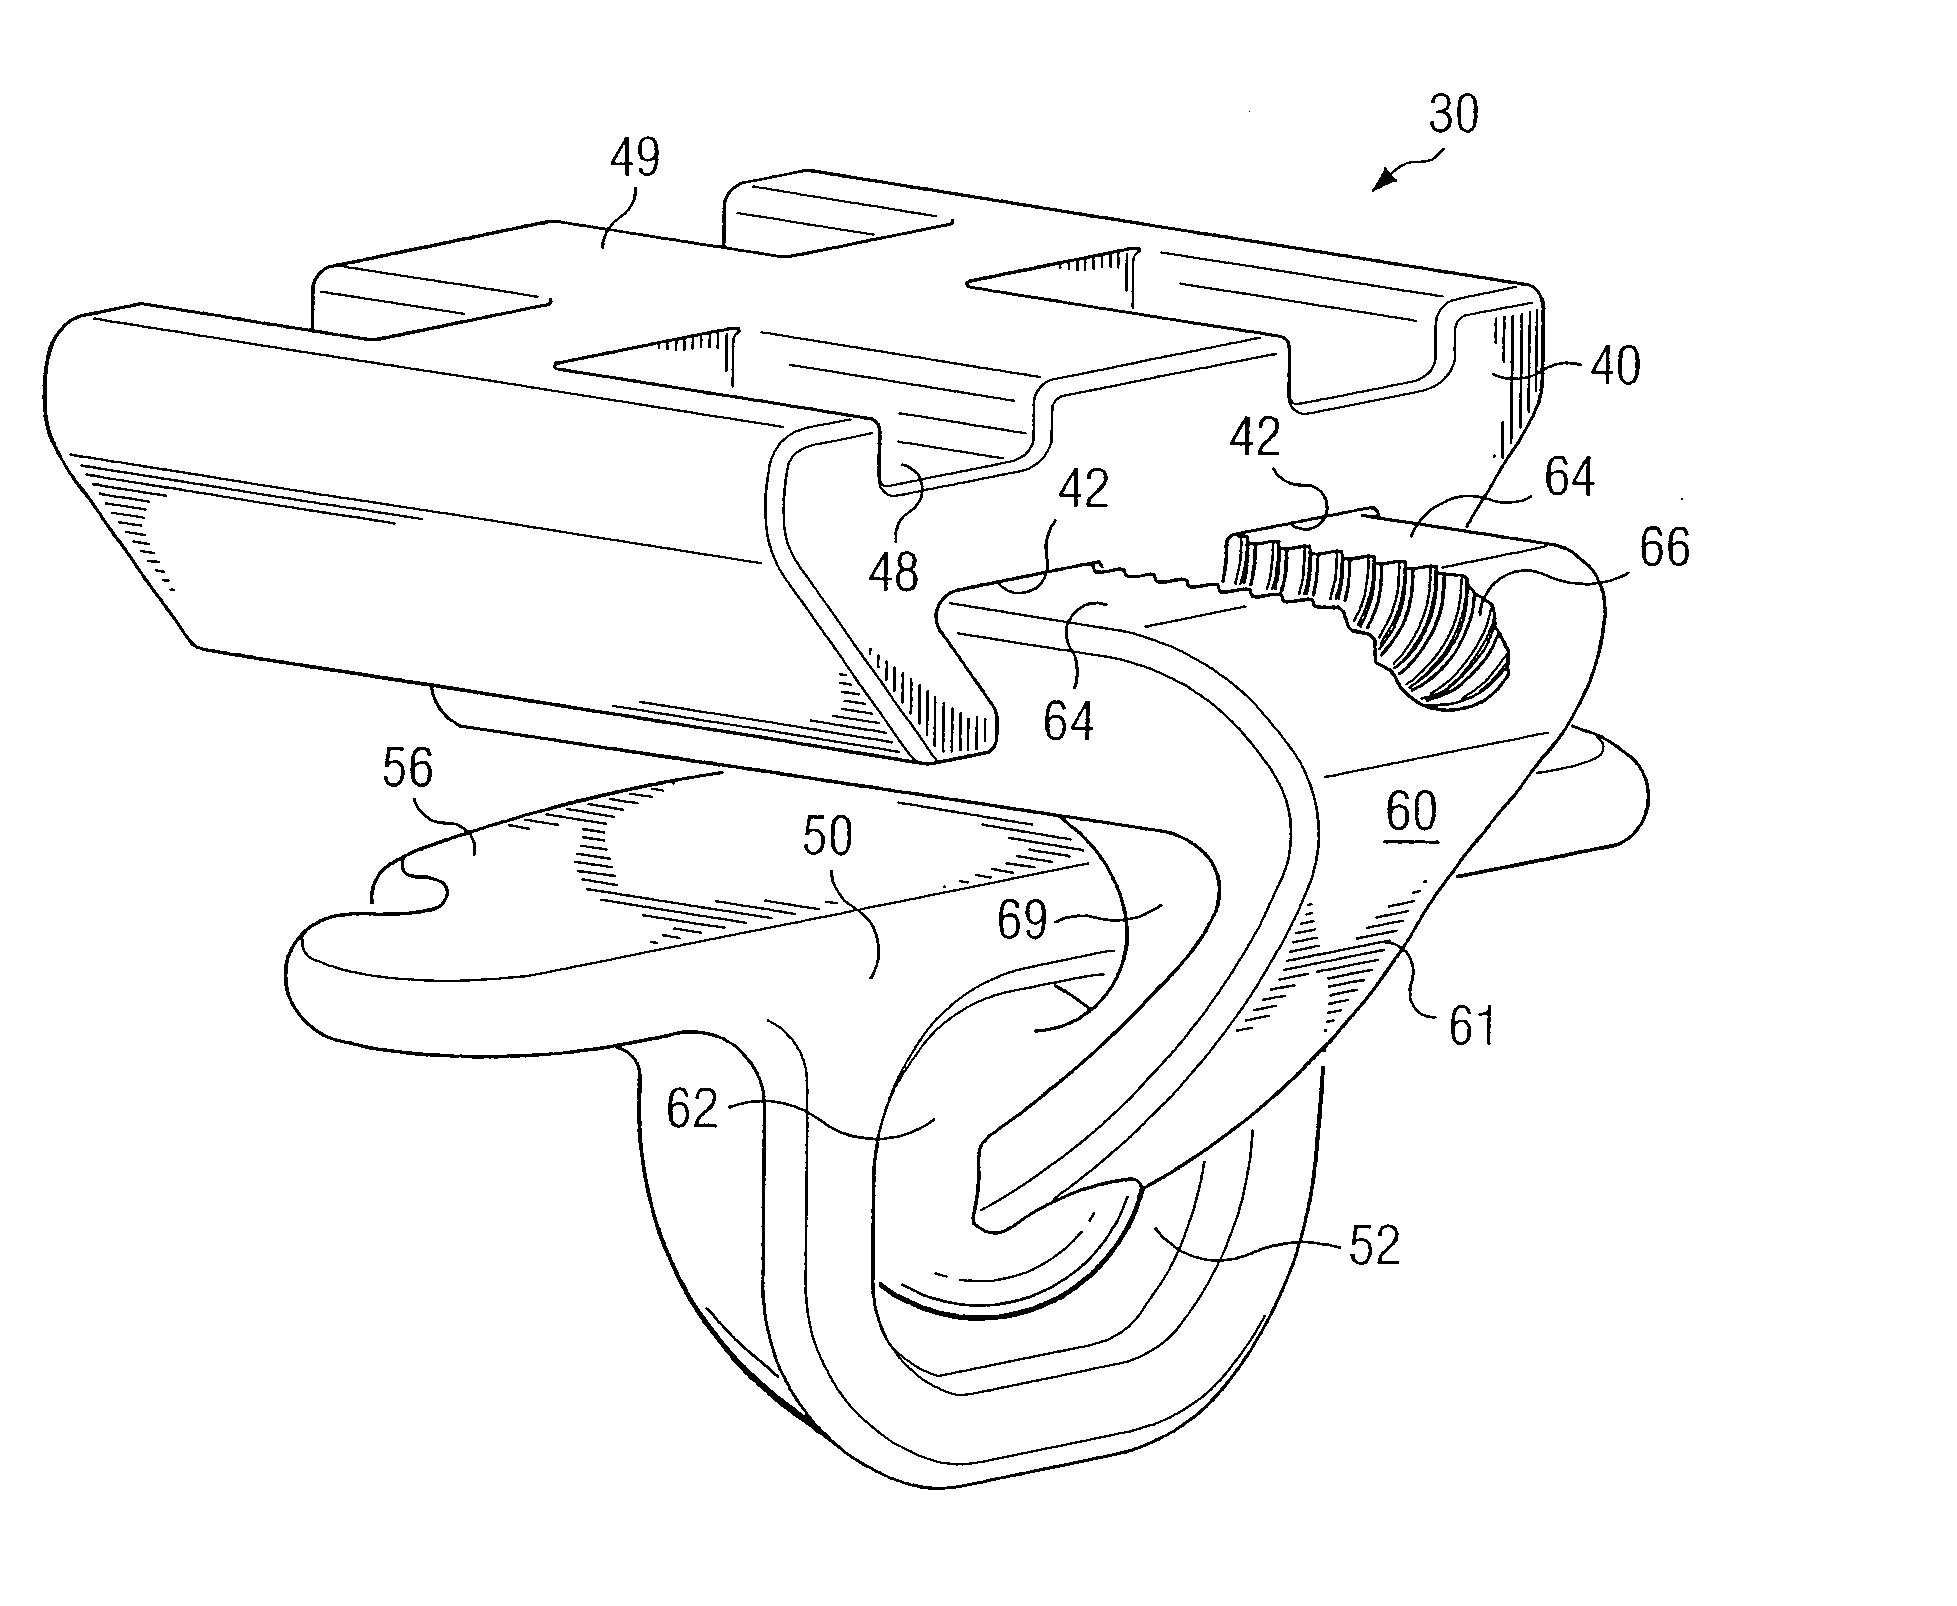 Device and Method for Improving a User's Breathing